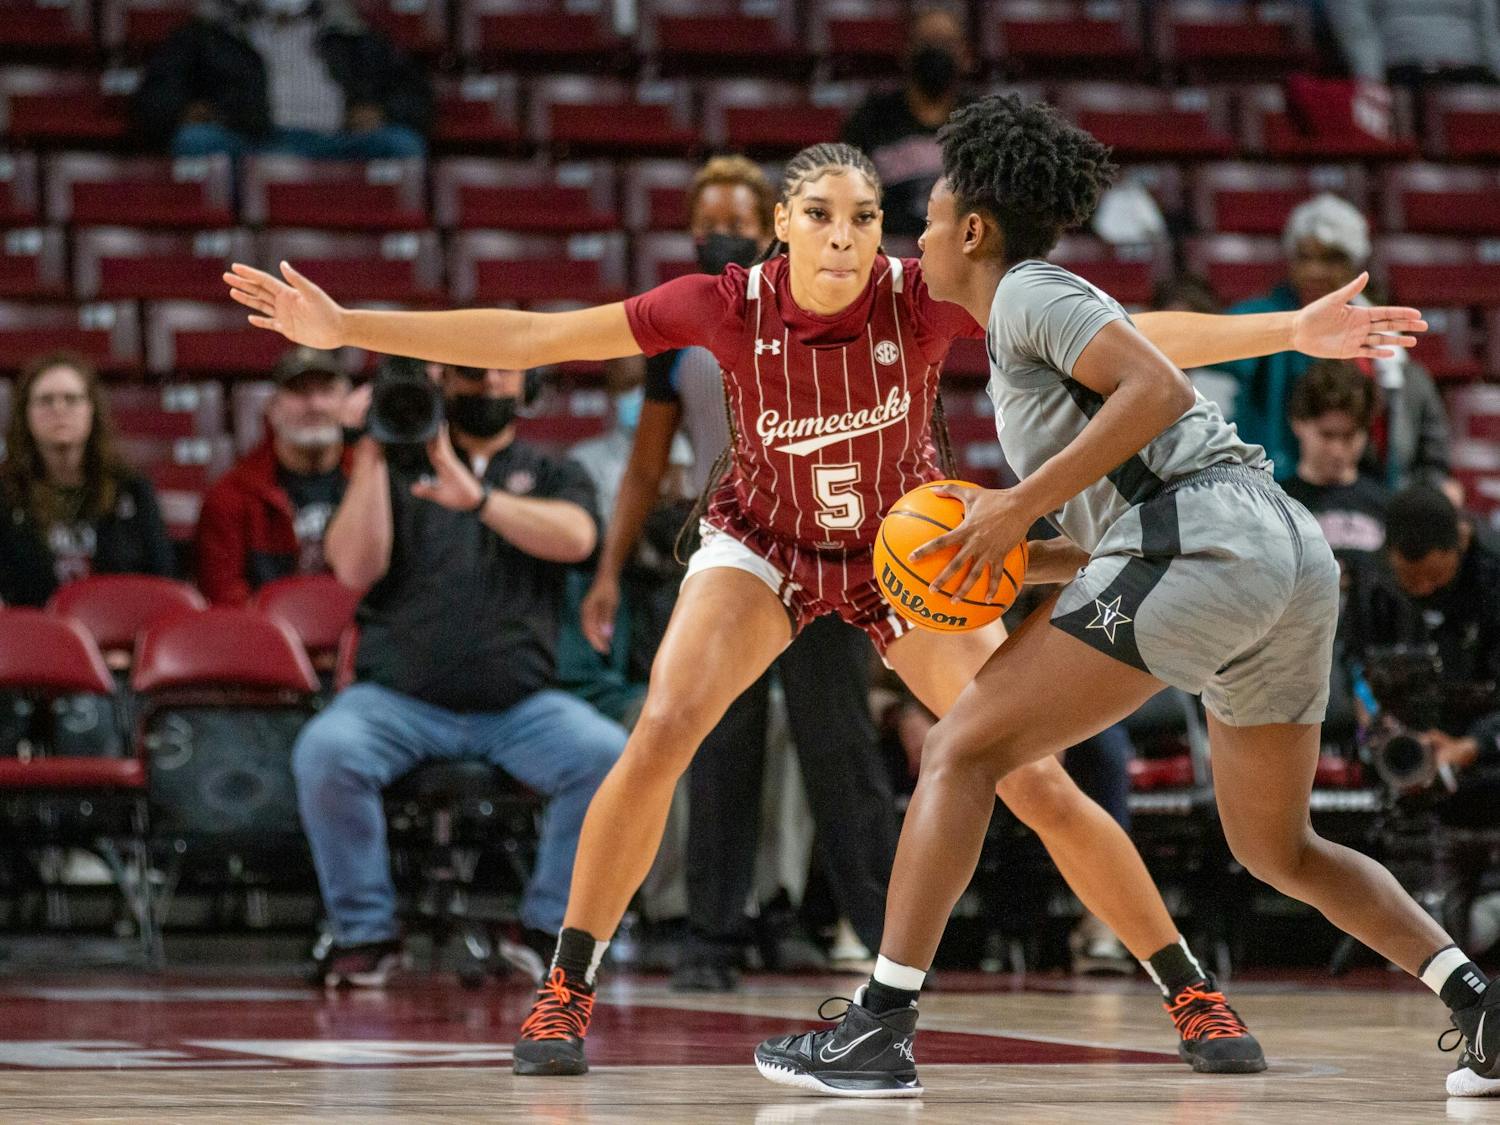 Senior forward Victaria Saxton matches up against a Vanderbilt opponent in a game at Colonial Life Arena on January 24, 2022. The Gamecock’s defense was vital to beating Vanderbilt 85-30. 